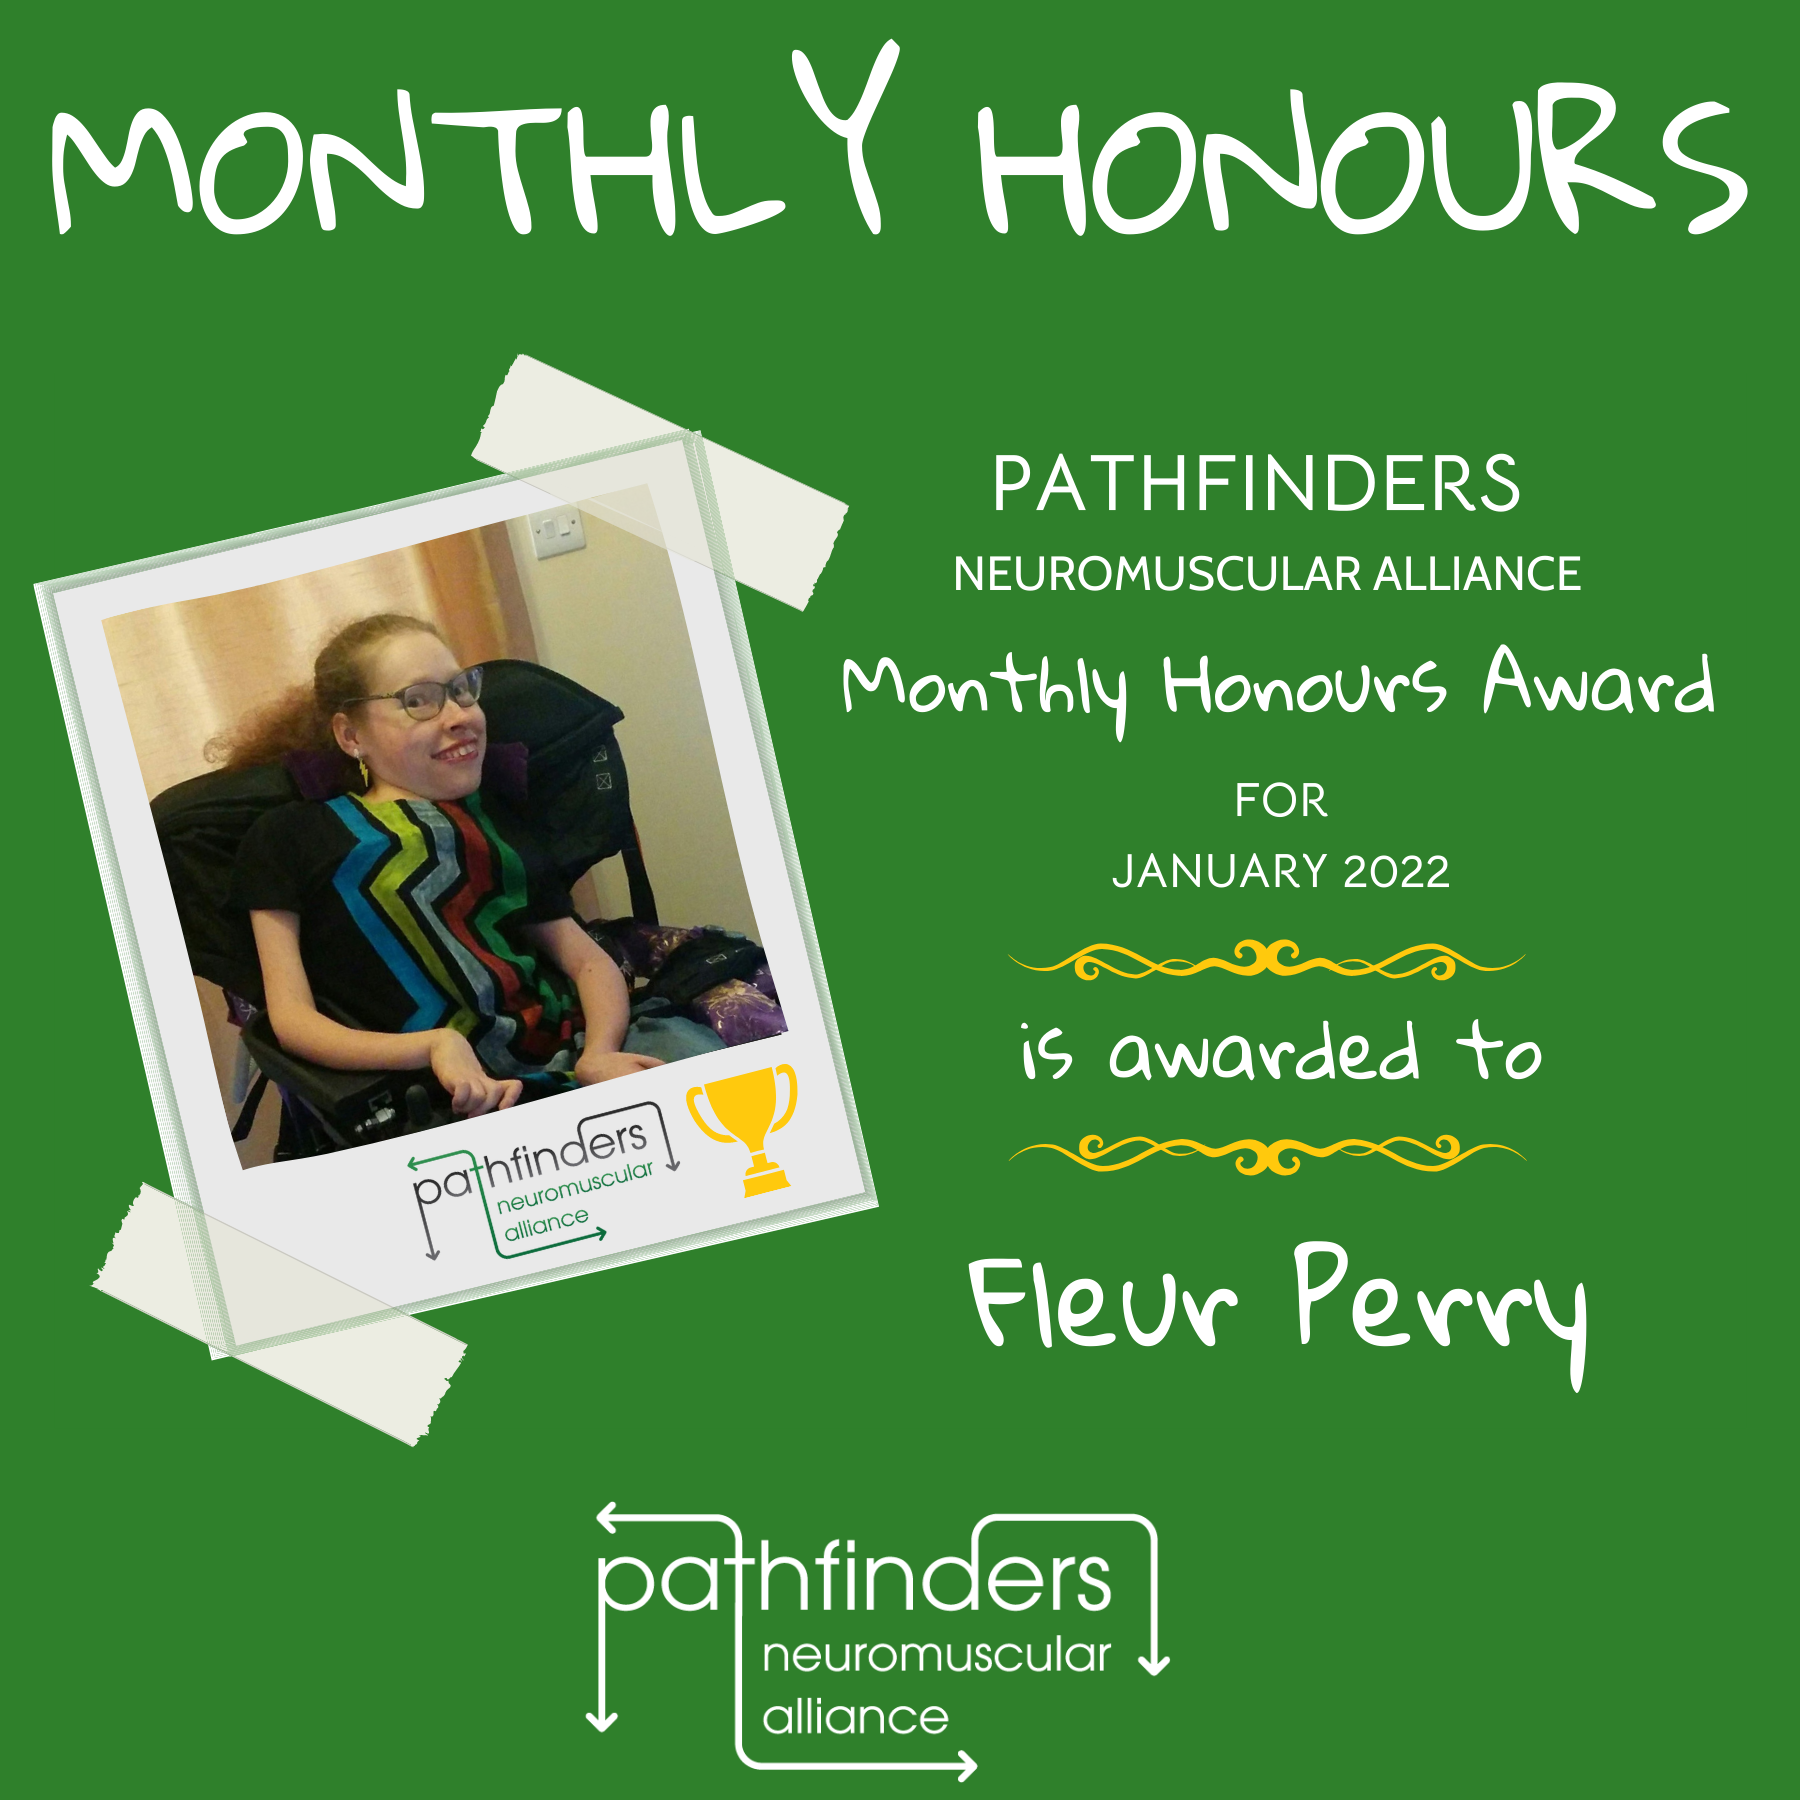 A green background. On the left is a polaroid-style image of Fleur Perry, a white woman in a black electric wheelchair, with light coloured hair, glasses, and a t-shirt with five coloured zigzag vertical stripes. On the right of the image it says "Pathfinders Neuromuscular Alliance Monthly Honours award for January 2022 is awarded to Fleur Perry